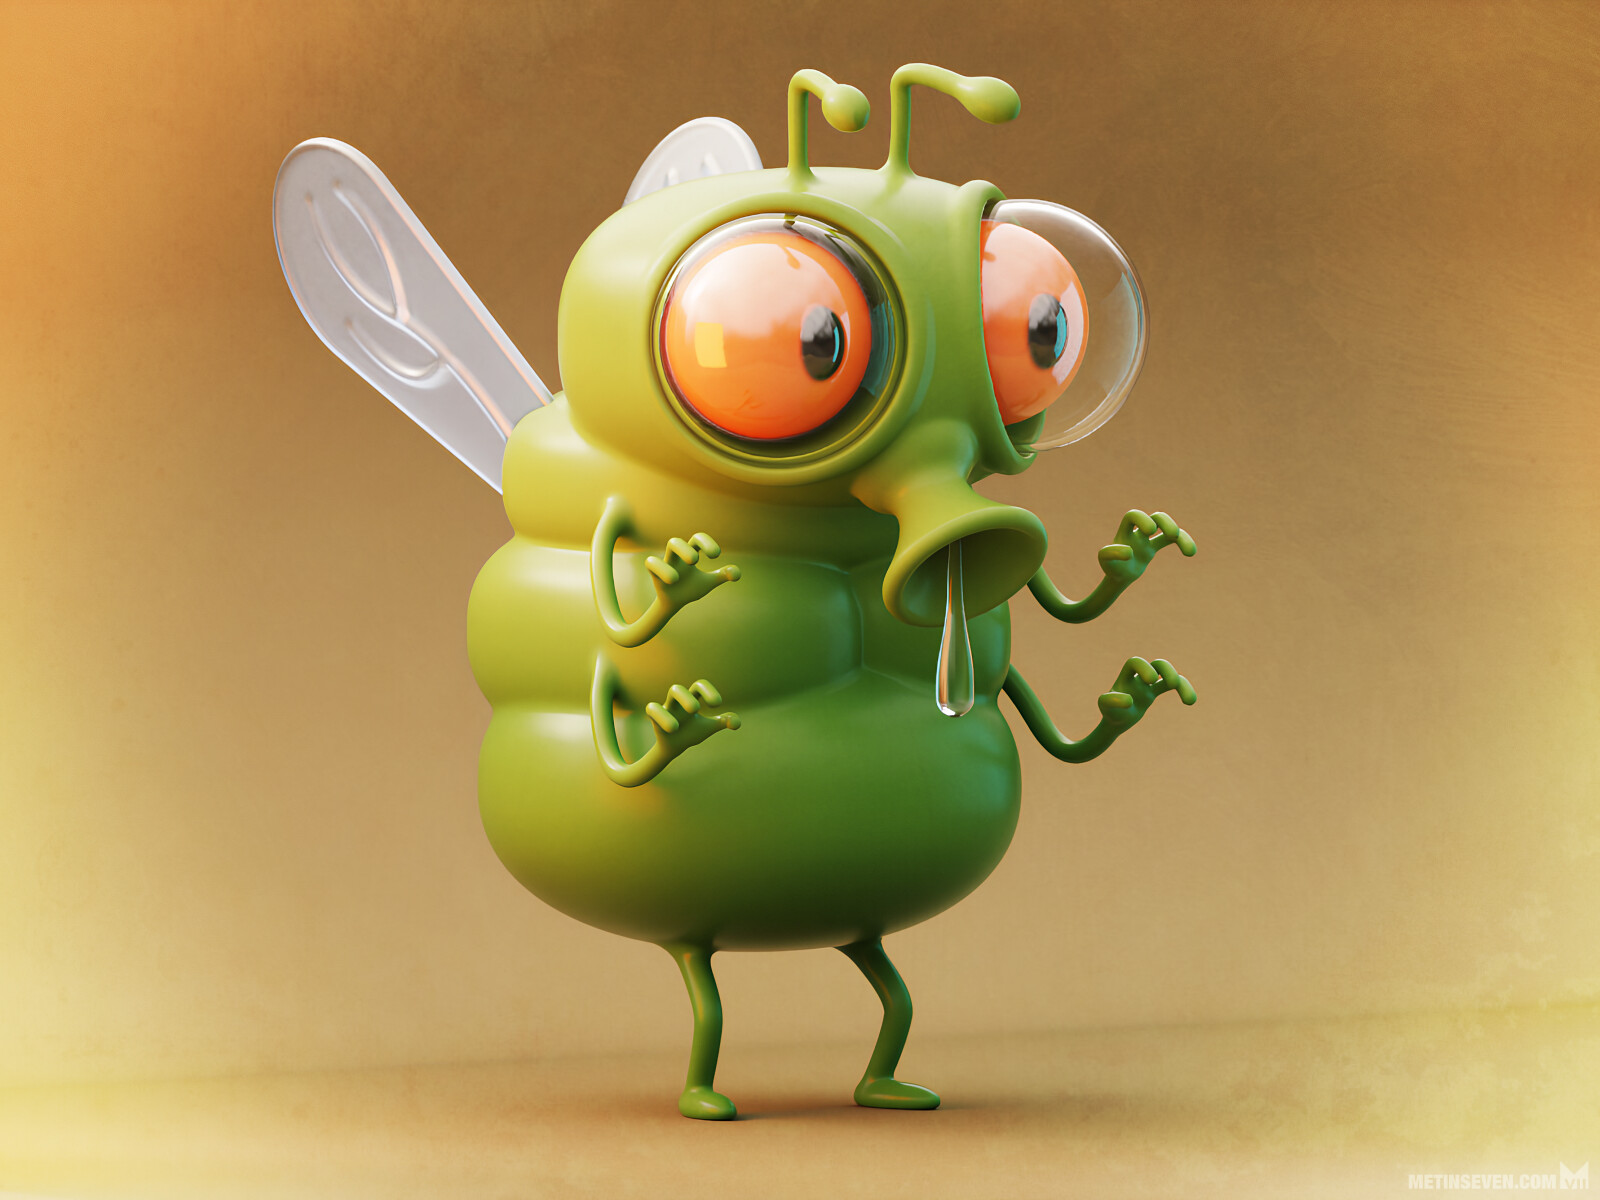 The eager bug. 🪰 A cartoon-style 3D character design.